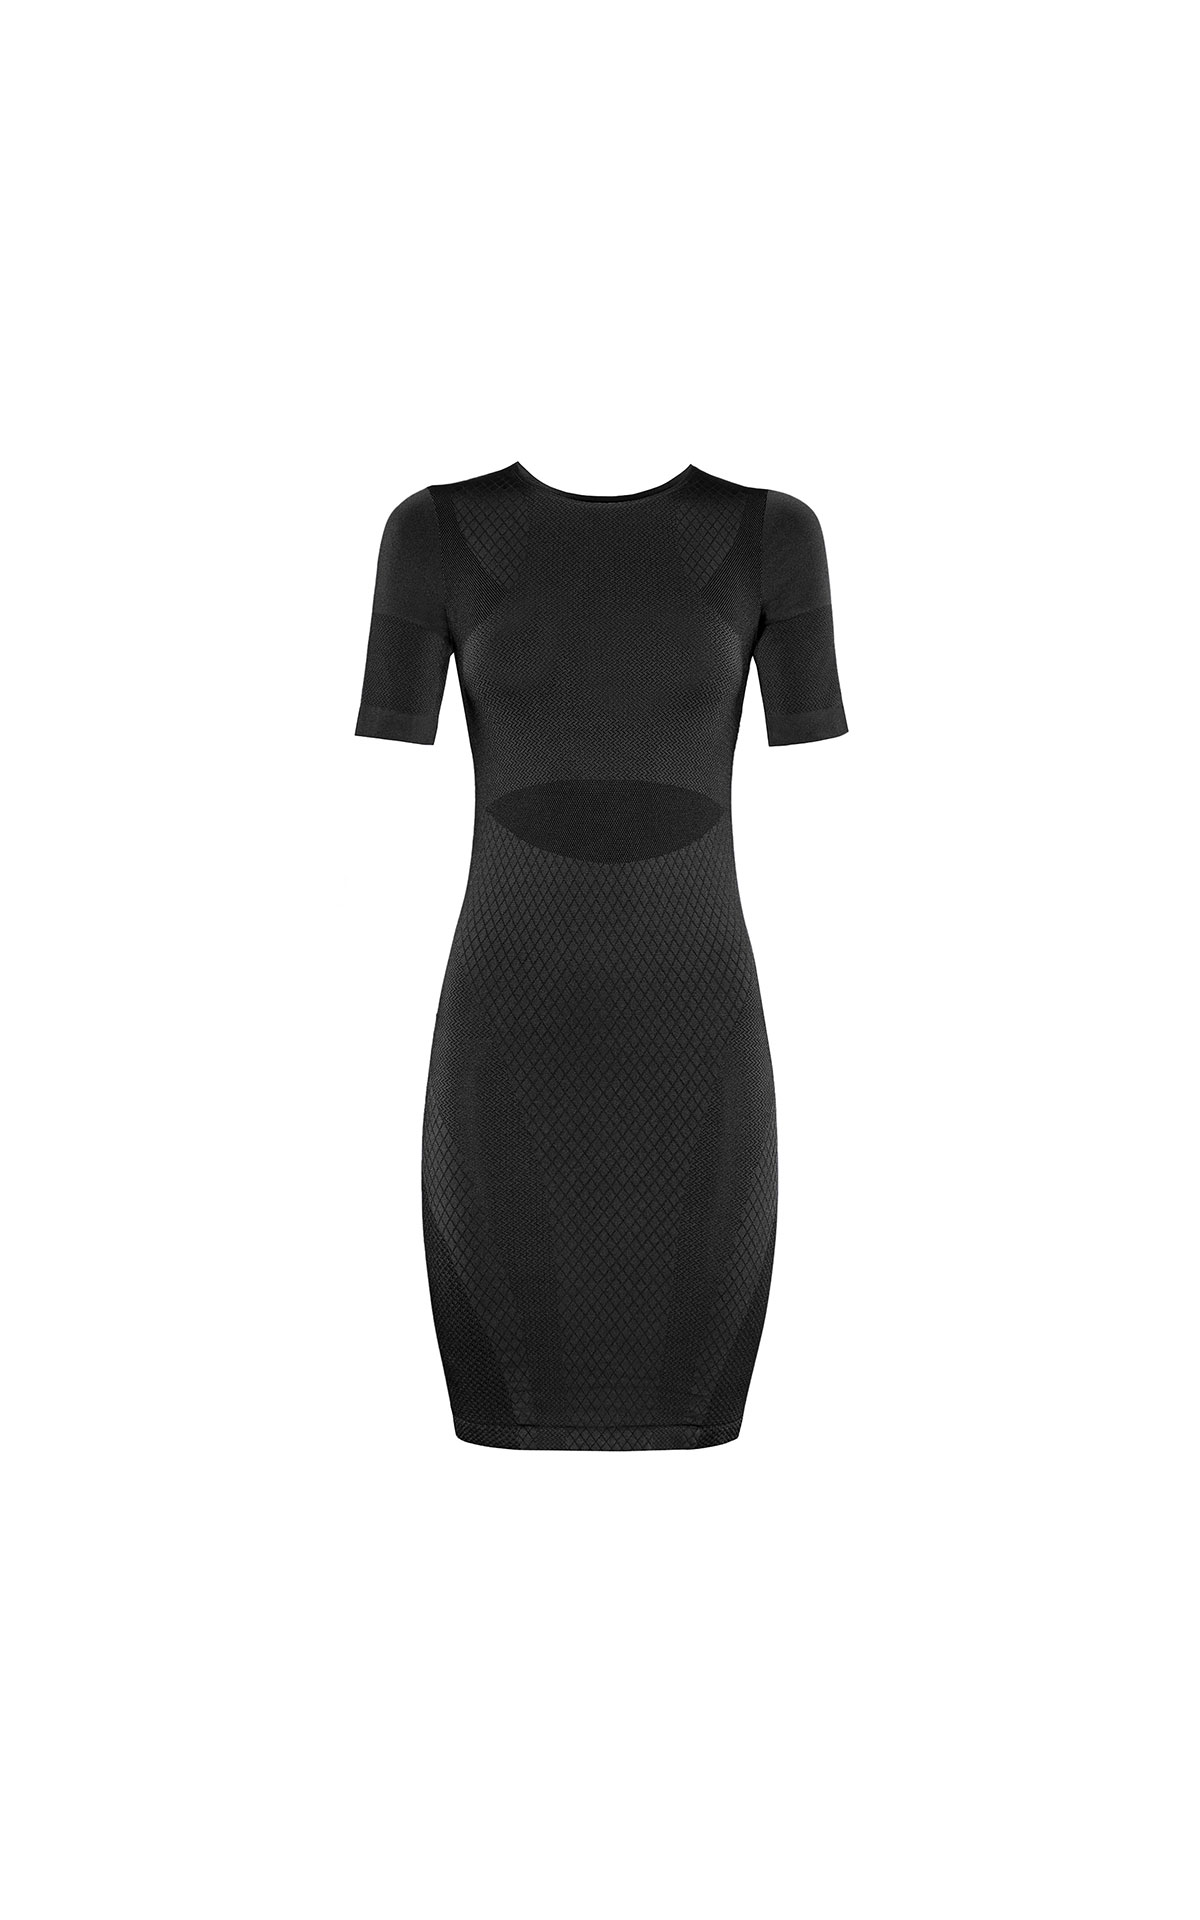 Wolford Leeloo dress from Bicester Village